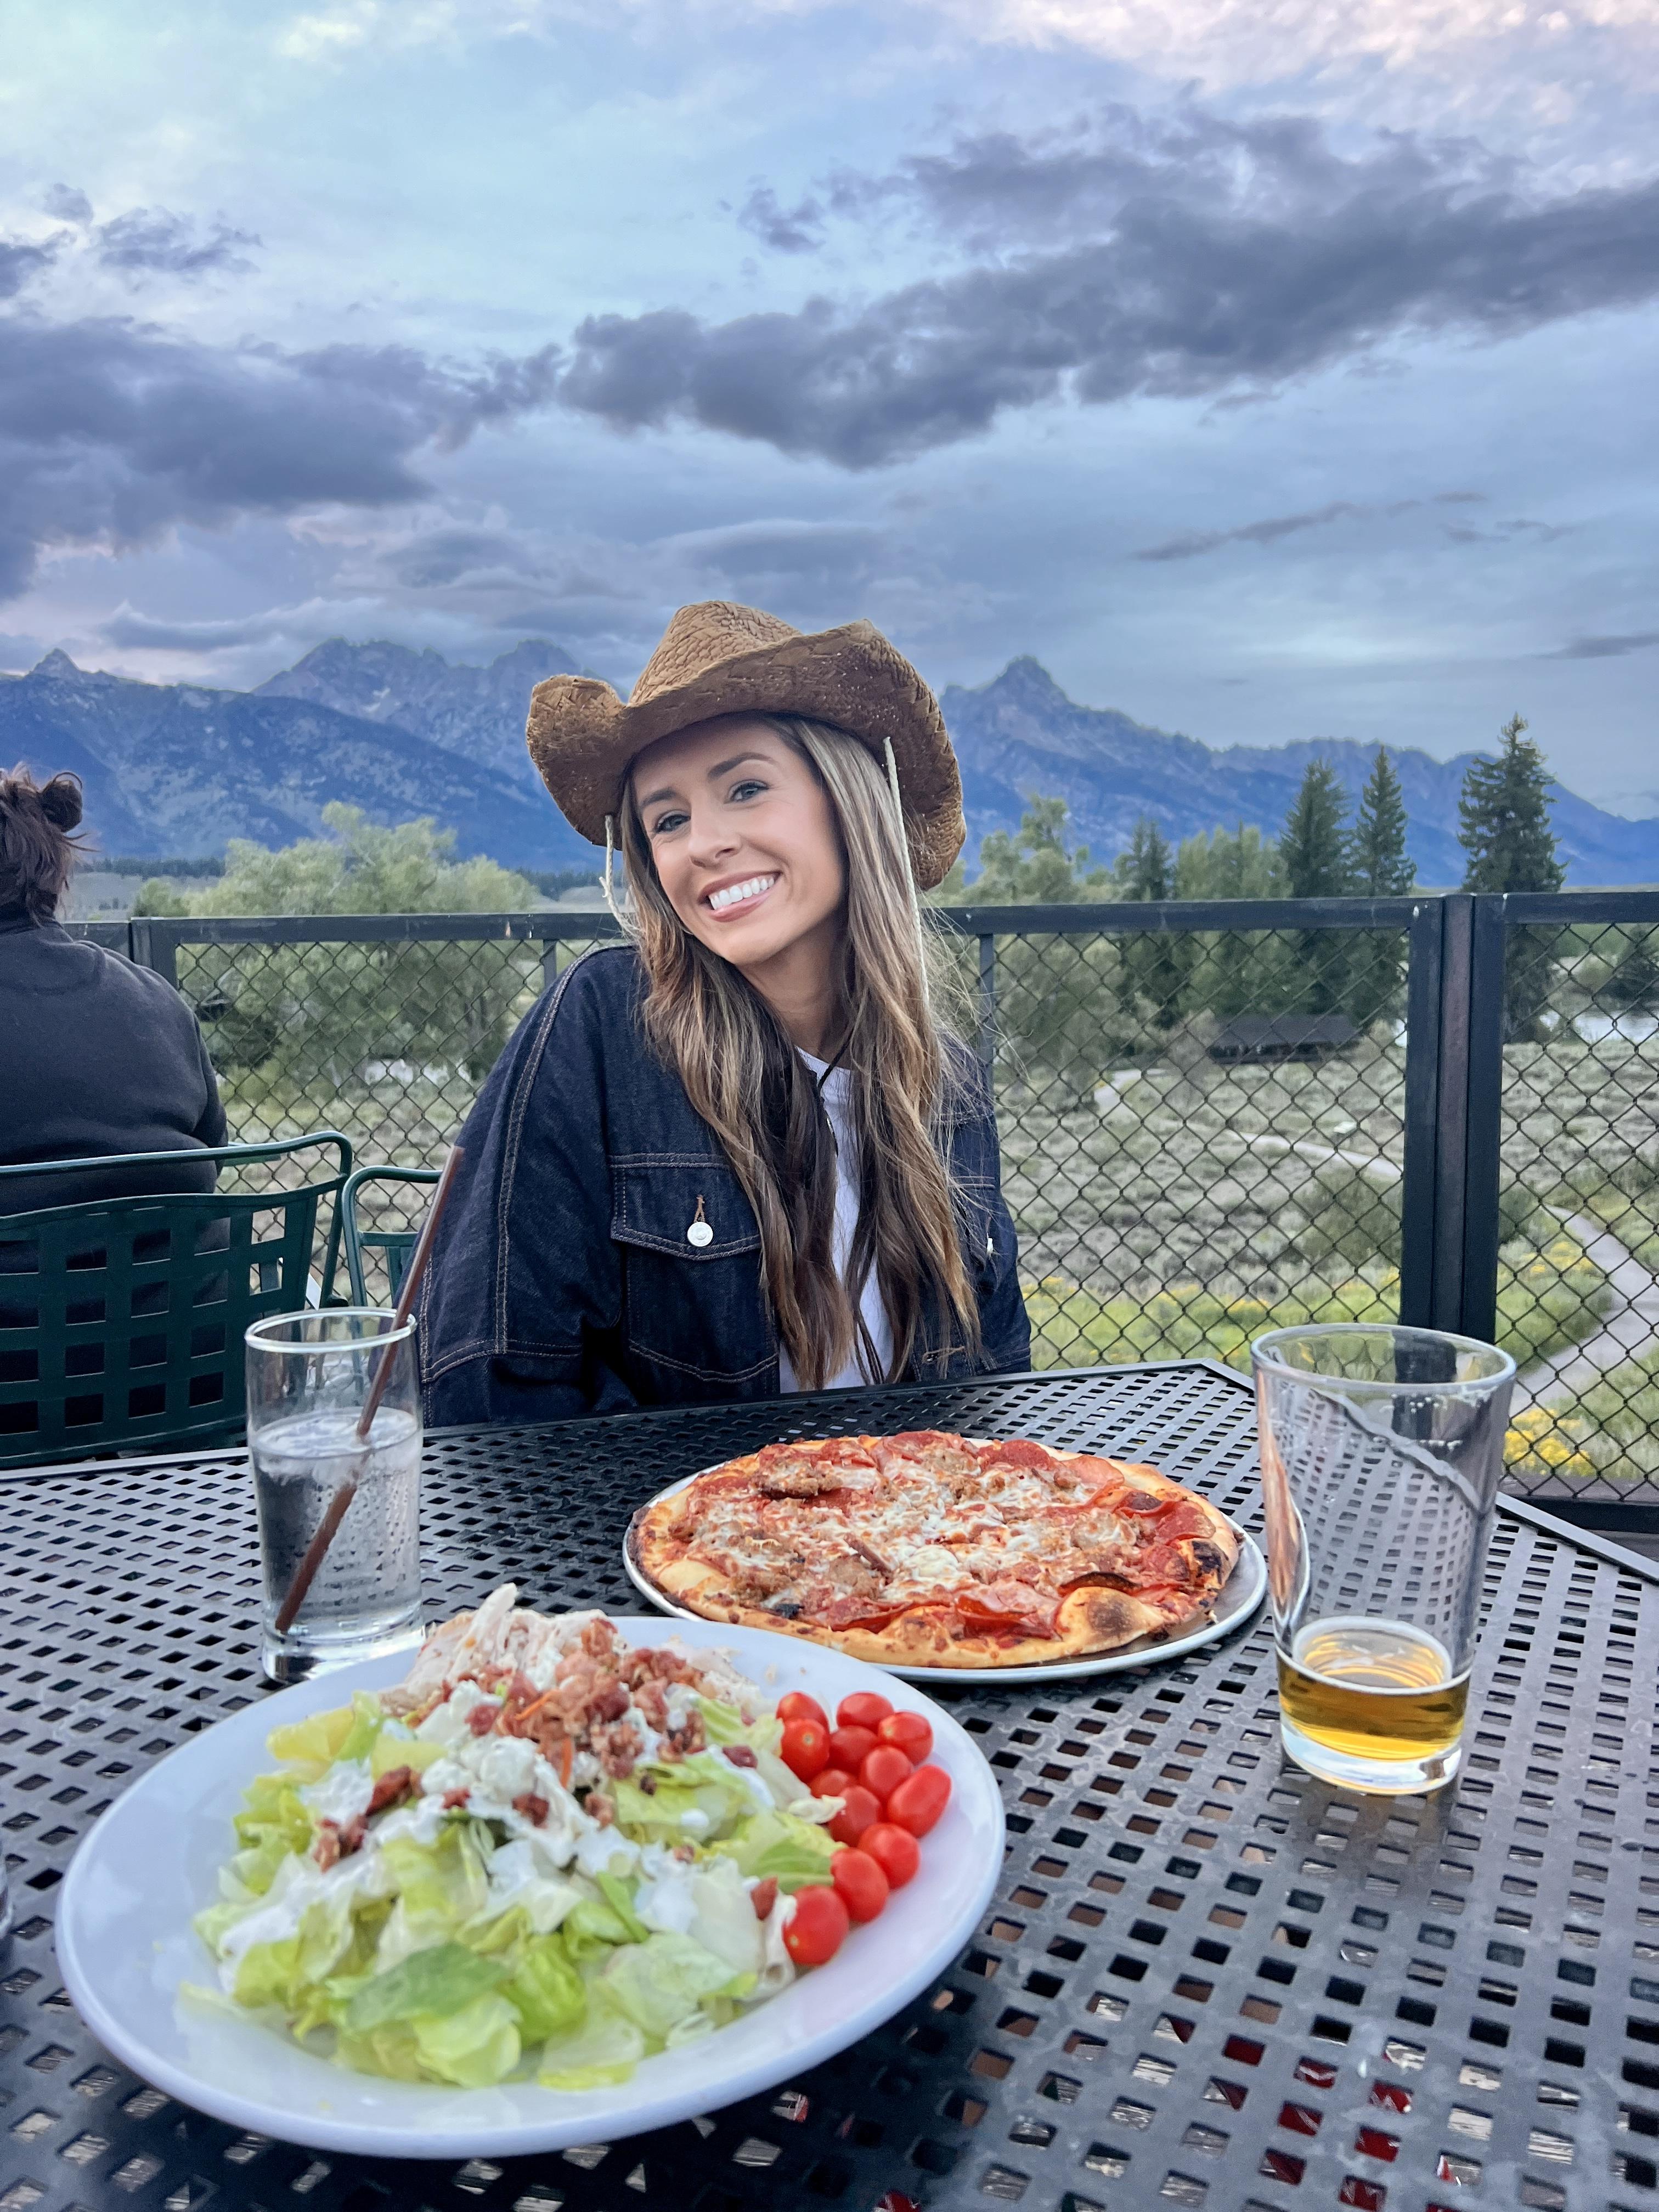 Post-Hike Activities in Jackson Hole